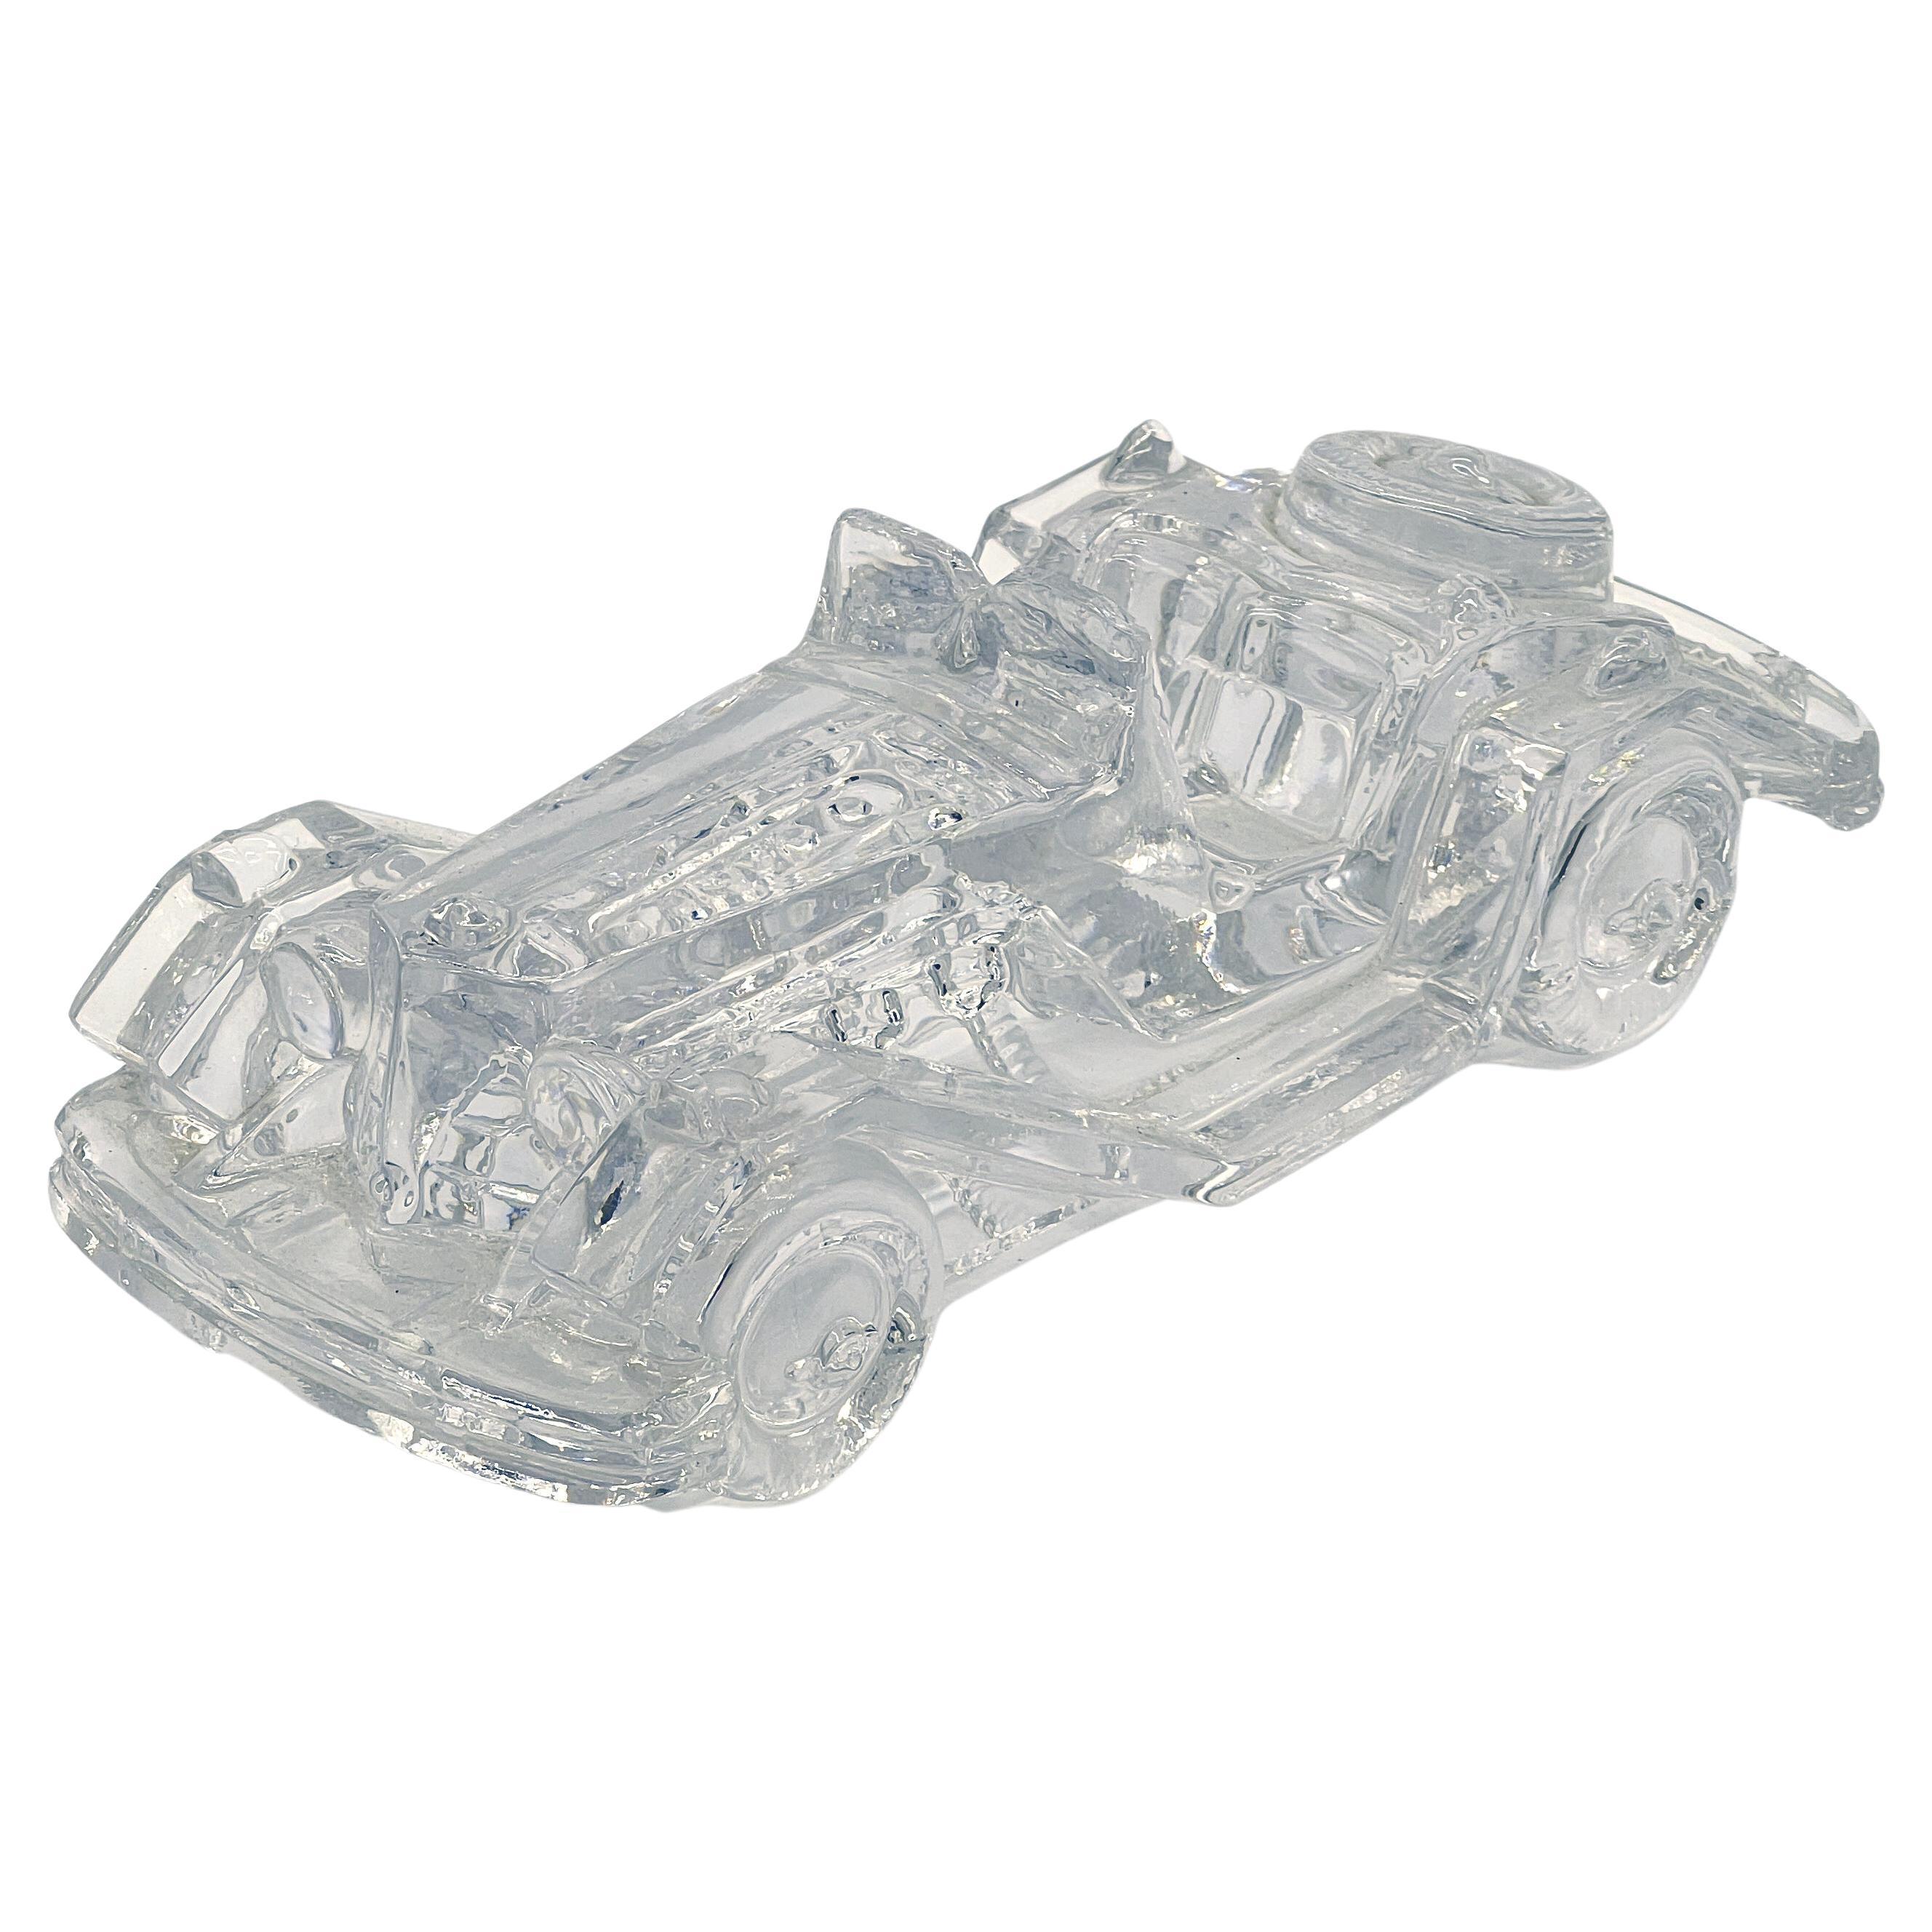 Vintage Clear Crystal Mg Roadster Decorative Model Car / Paperweight For Sale